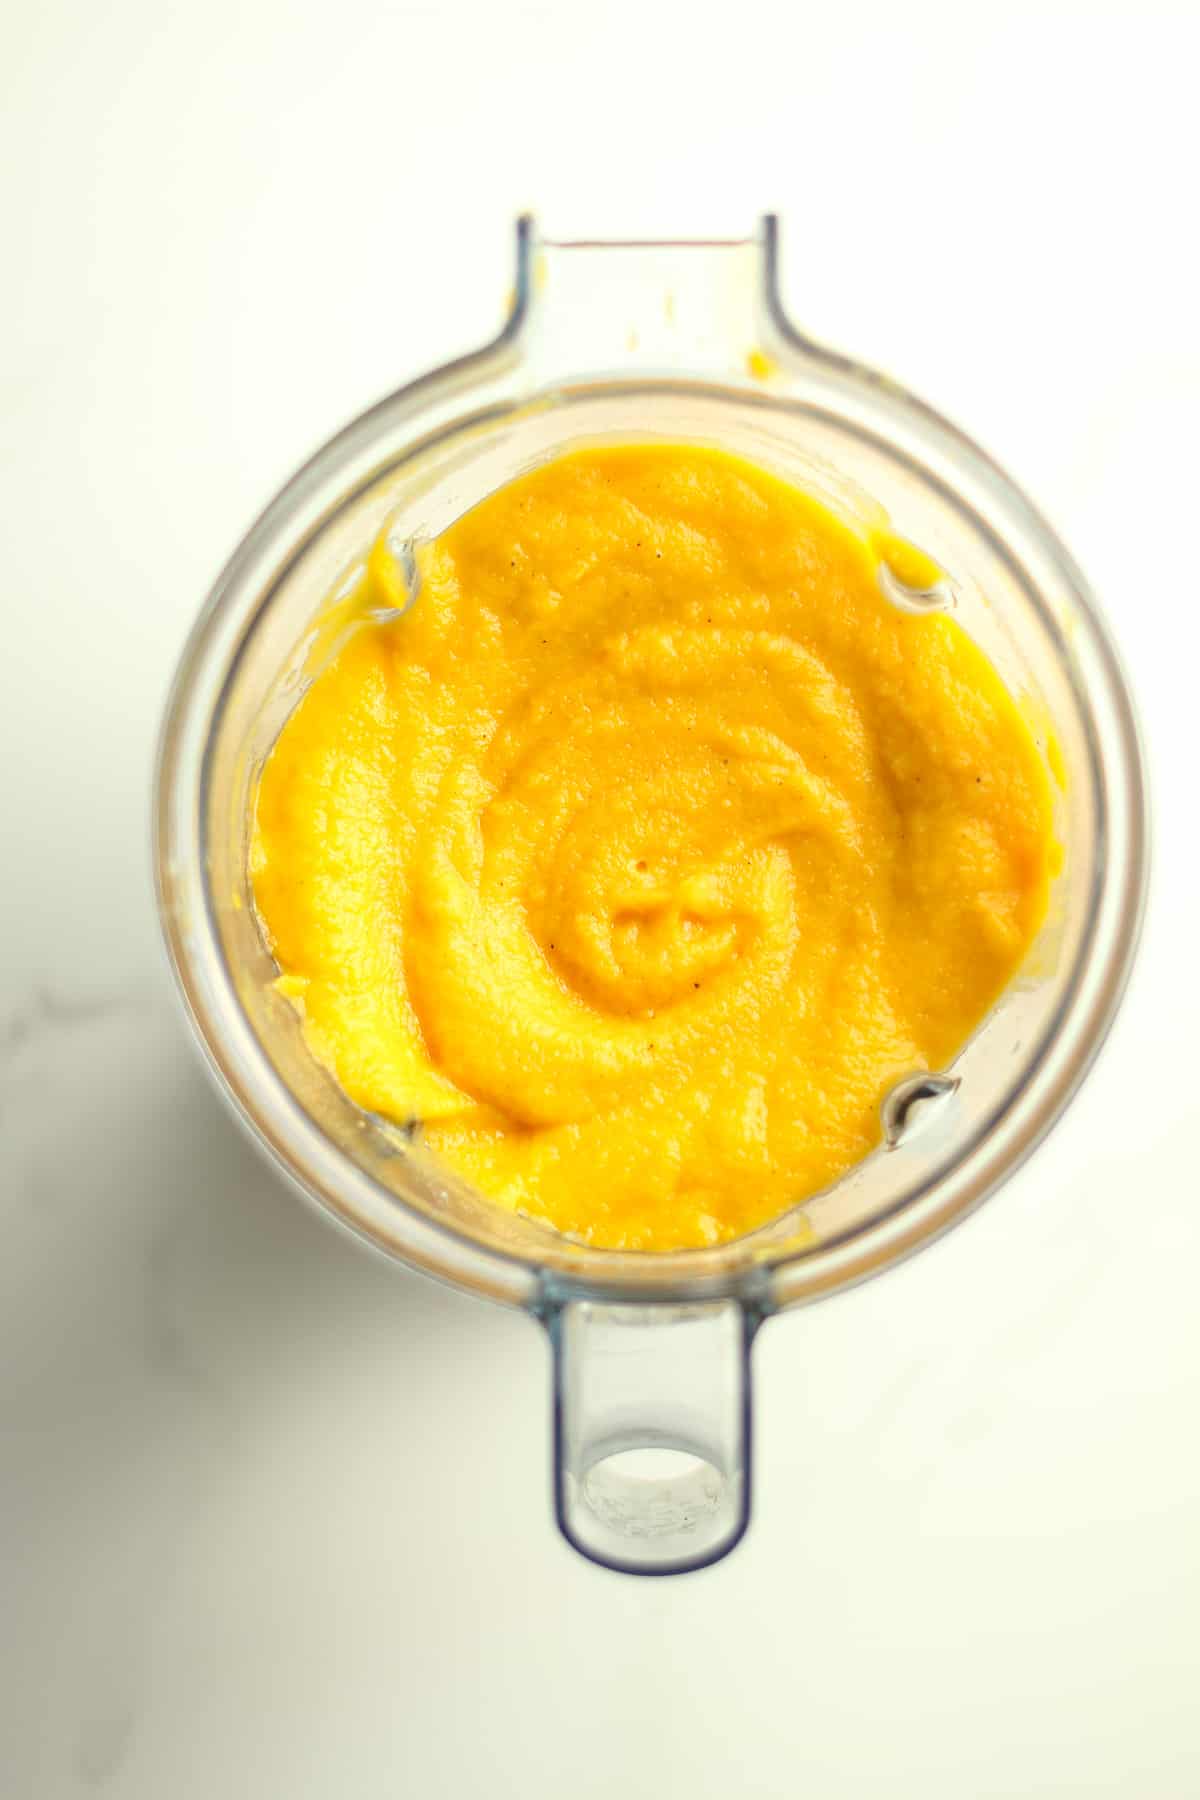 A blender full of the puree.